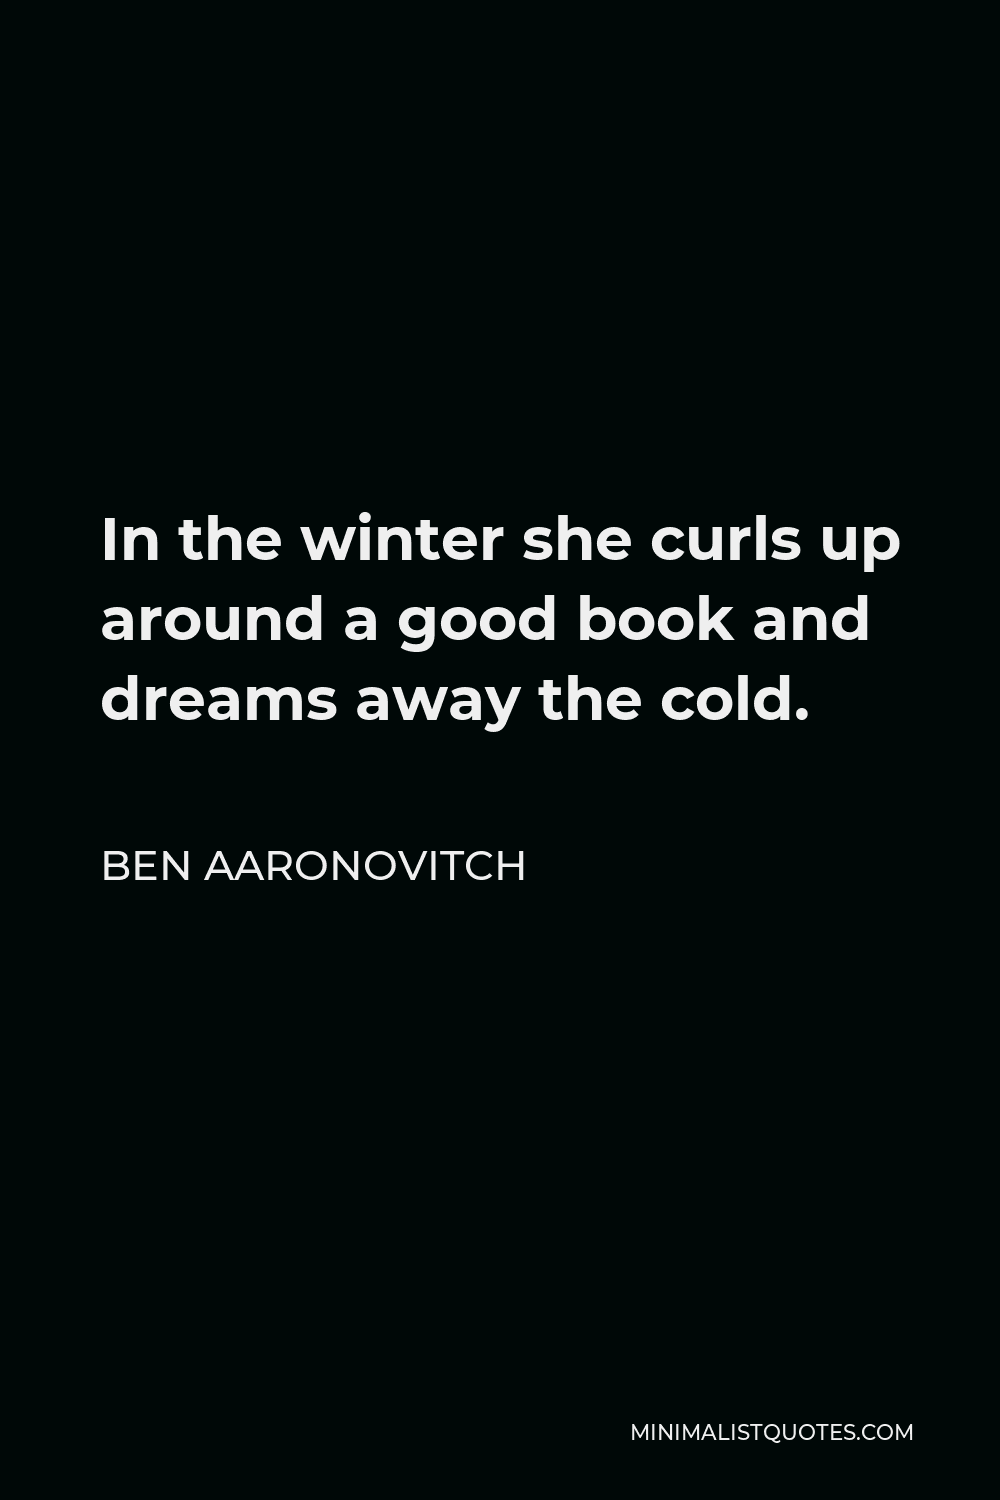 Ben Aaronovitch Quote - In the winter she curls up around a good book and dreams away the cold.